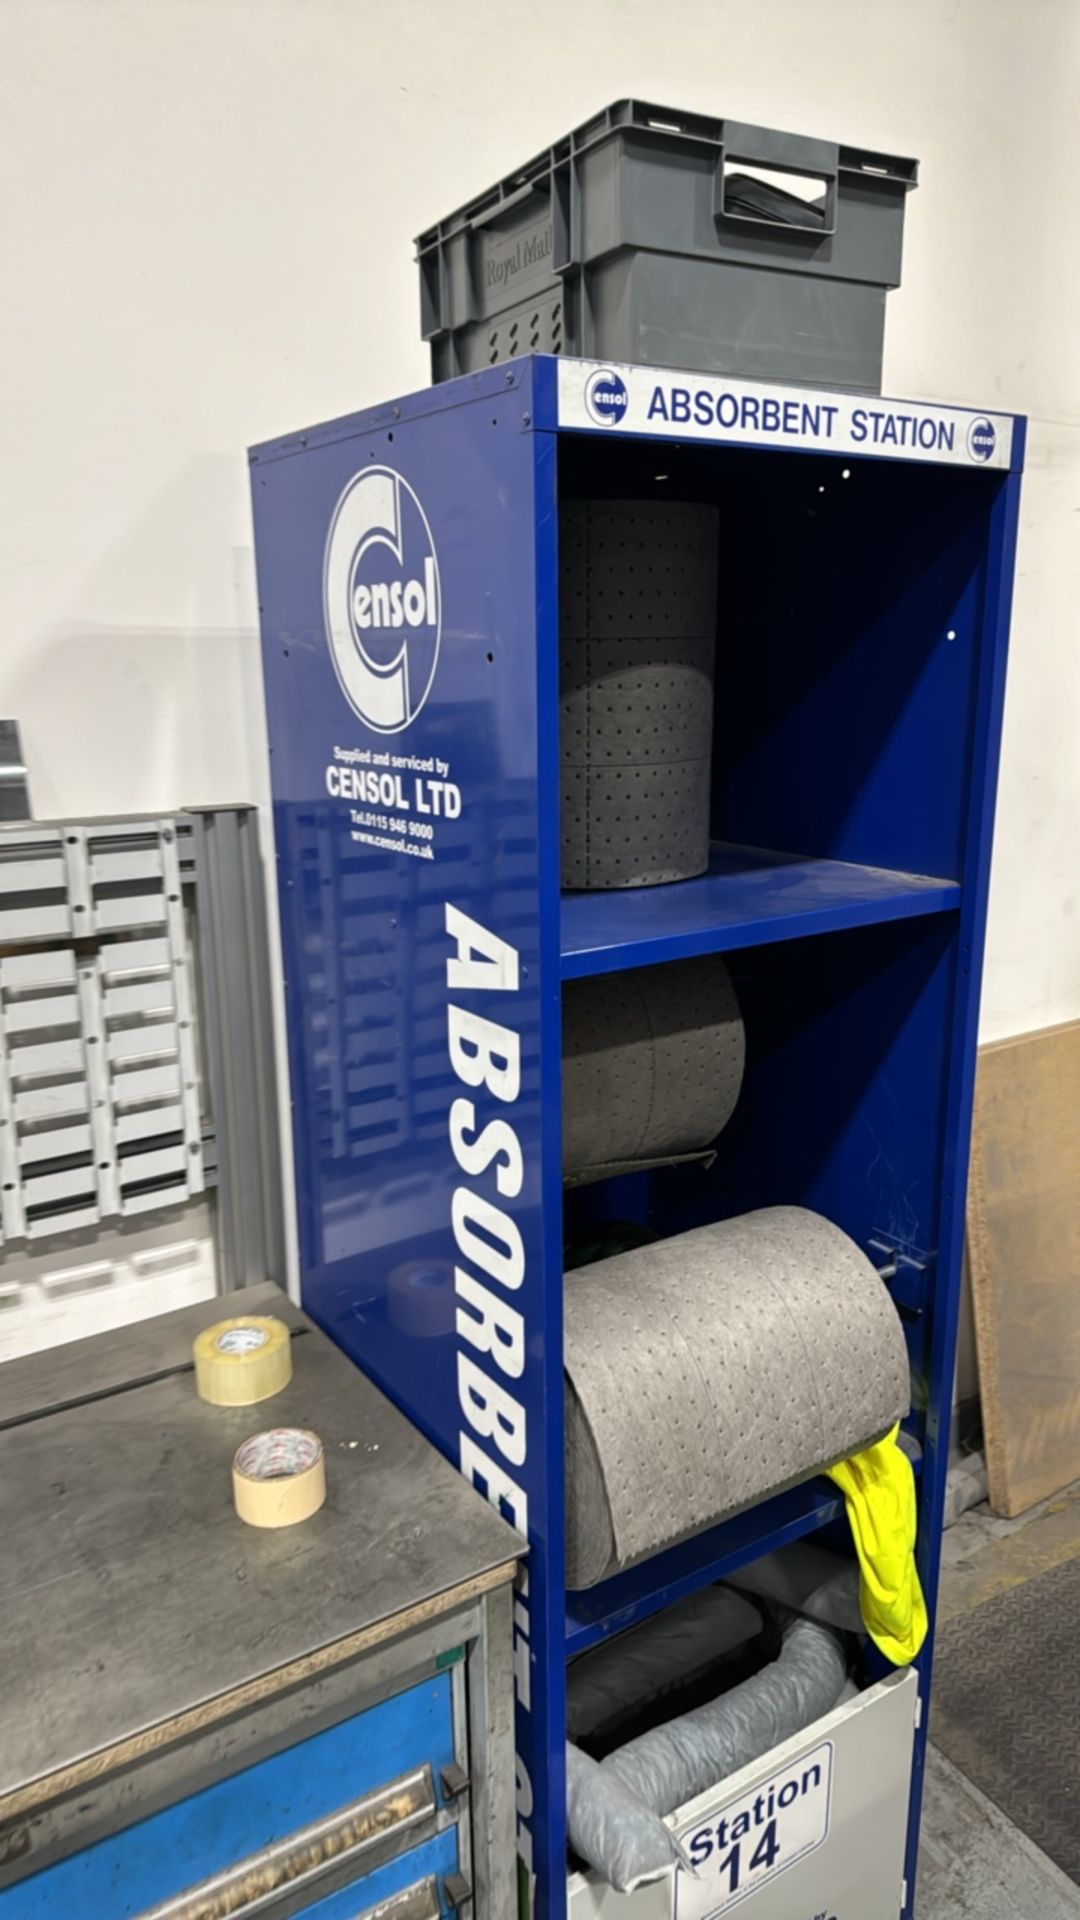 Censol Absorbent Station - Image 3 of 3